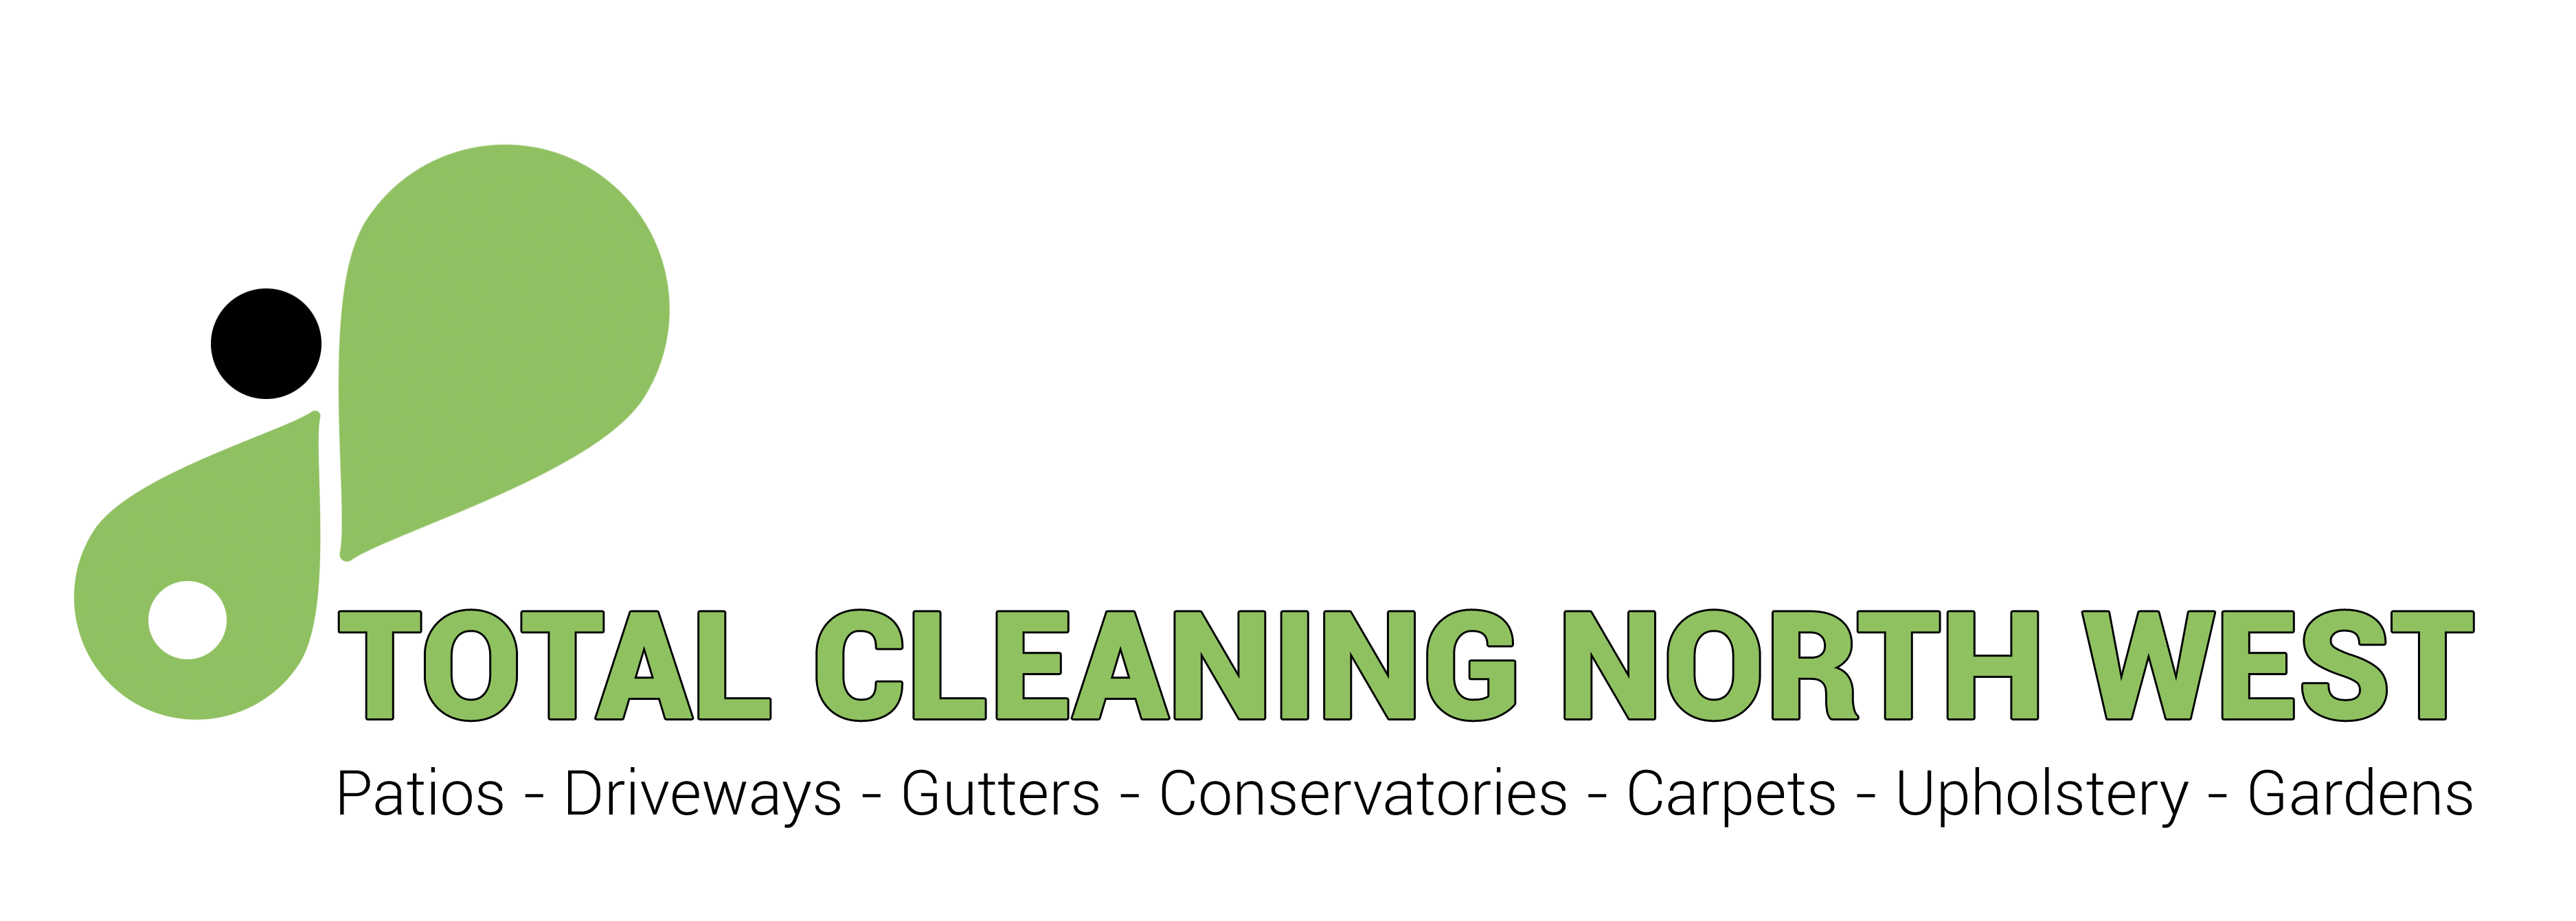 Total Cleaning North West